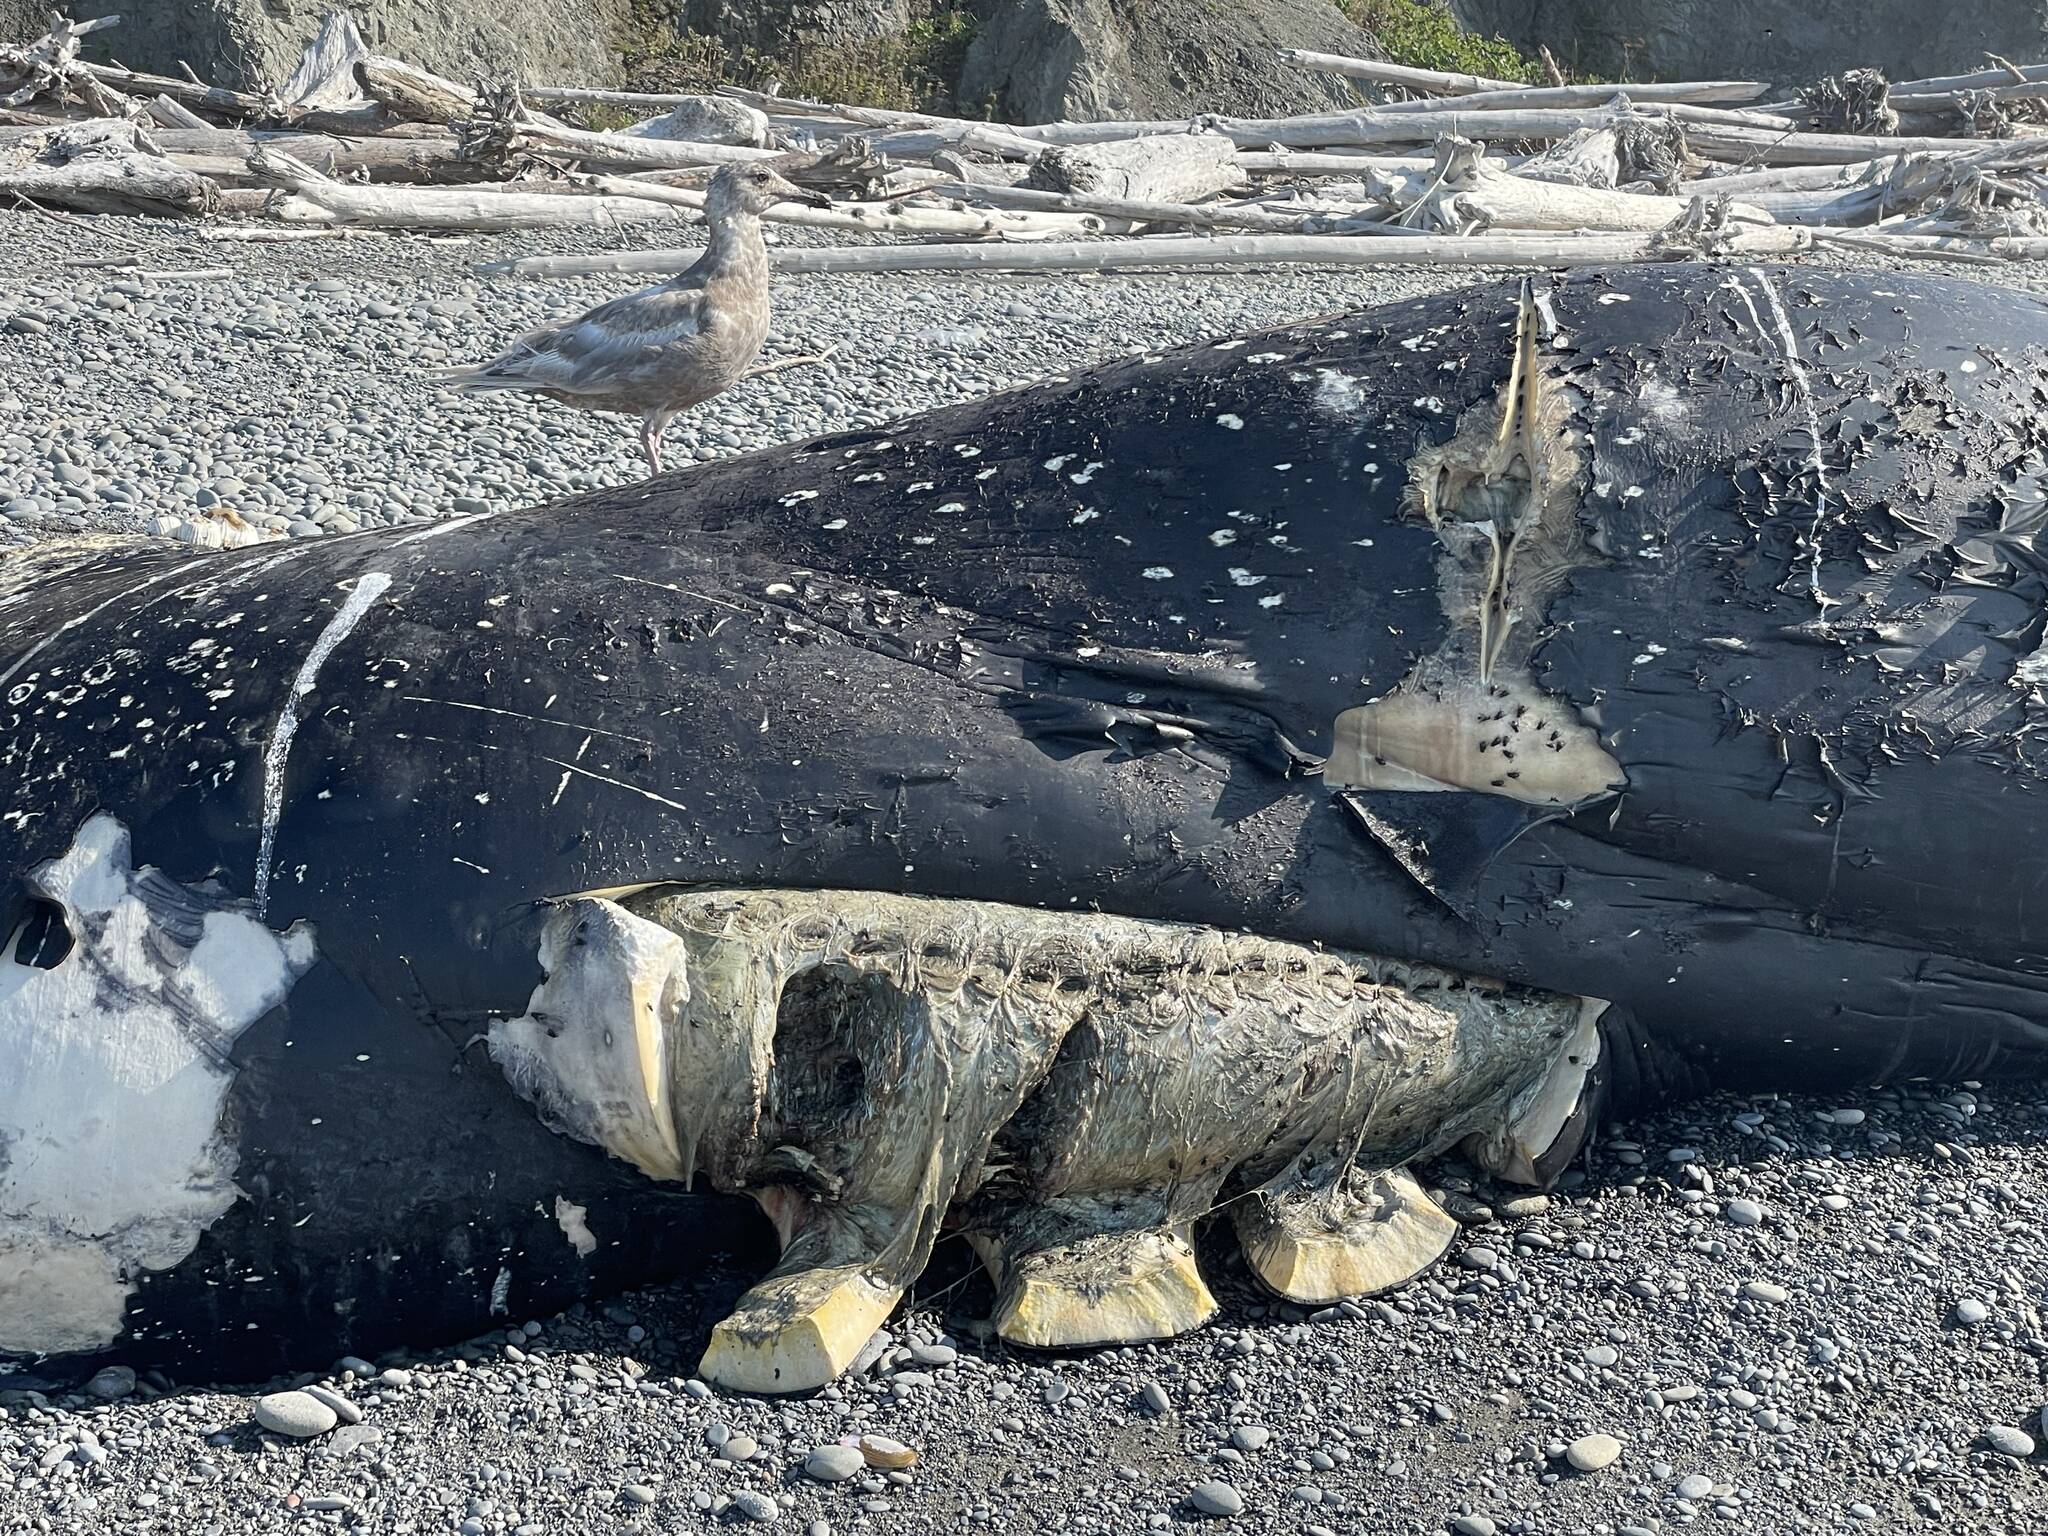 Michael S. Lockett | The Daily World 
Rot and decay of the corpse of a humpback whale are visible as it putrefies onshore near Ruby Beach on Oct. 15.